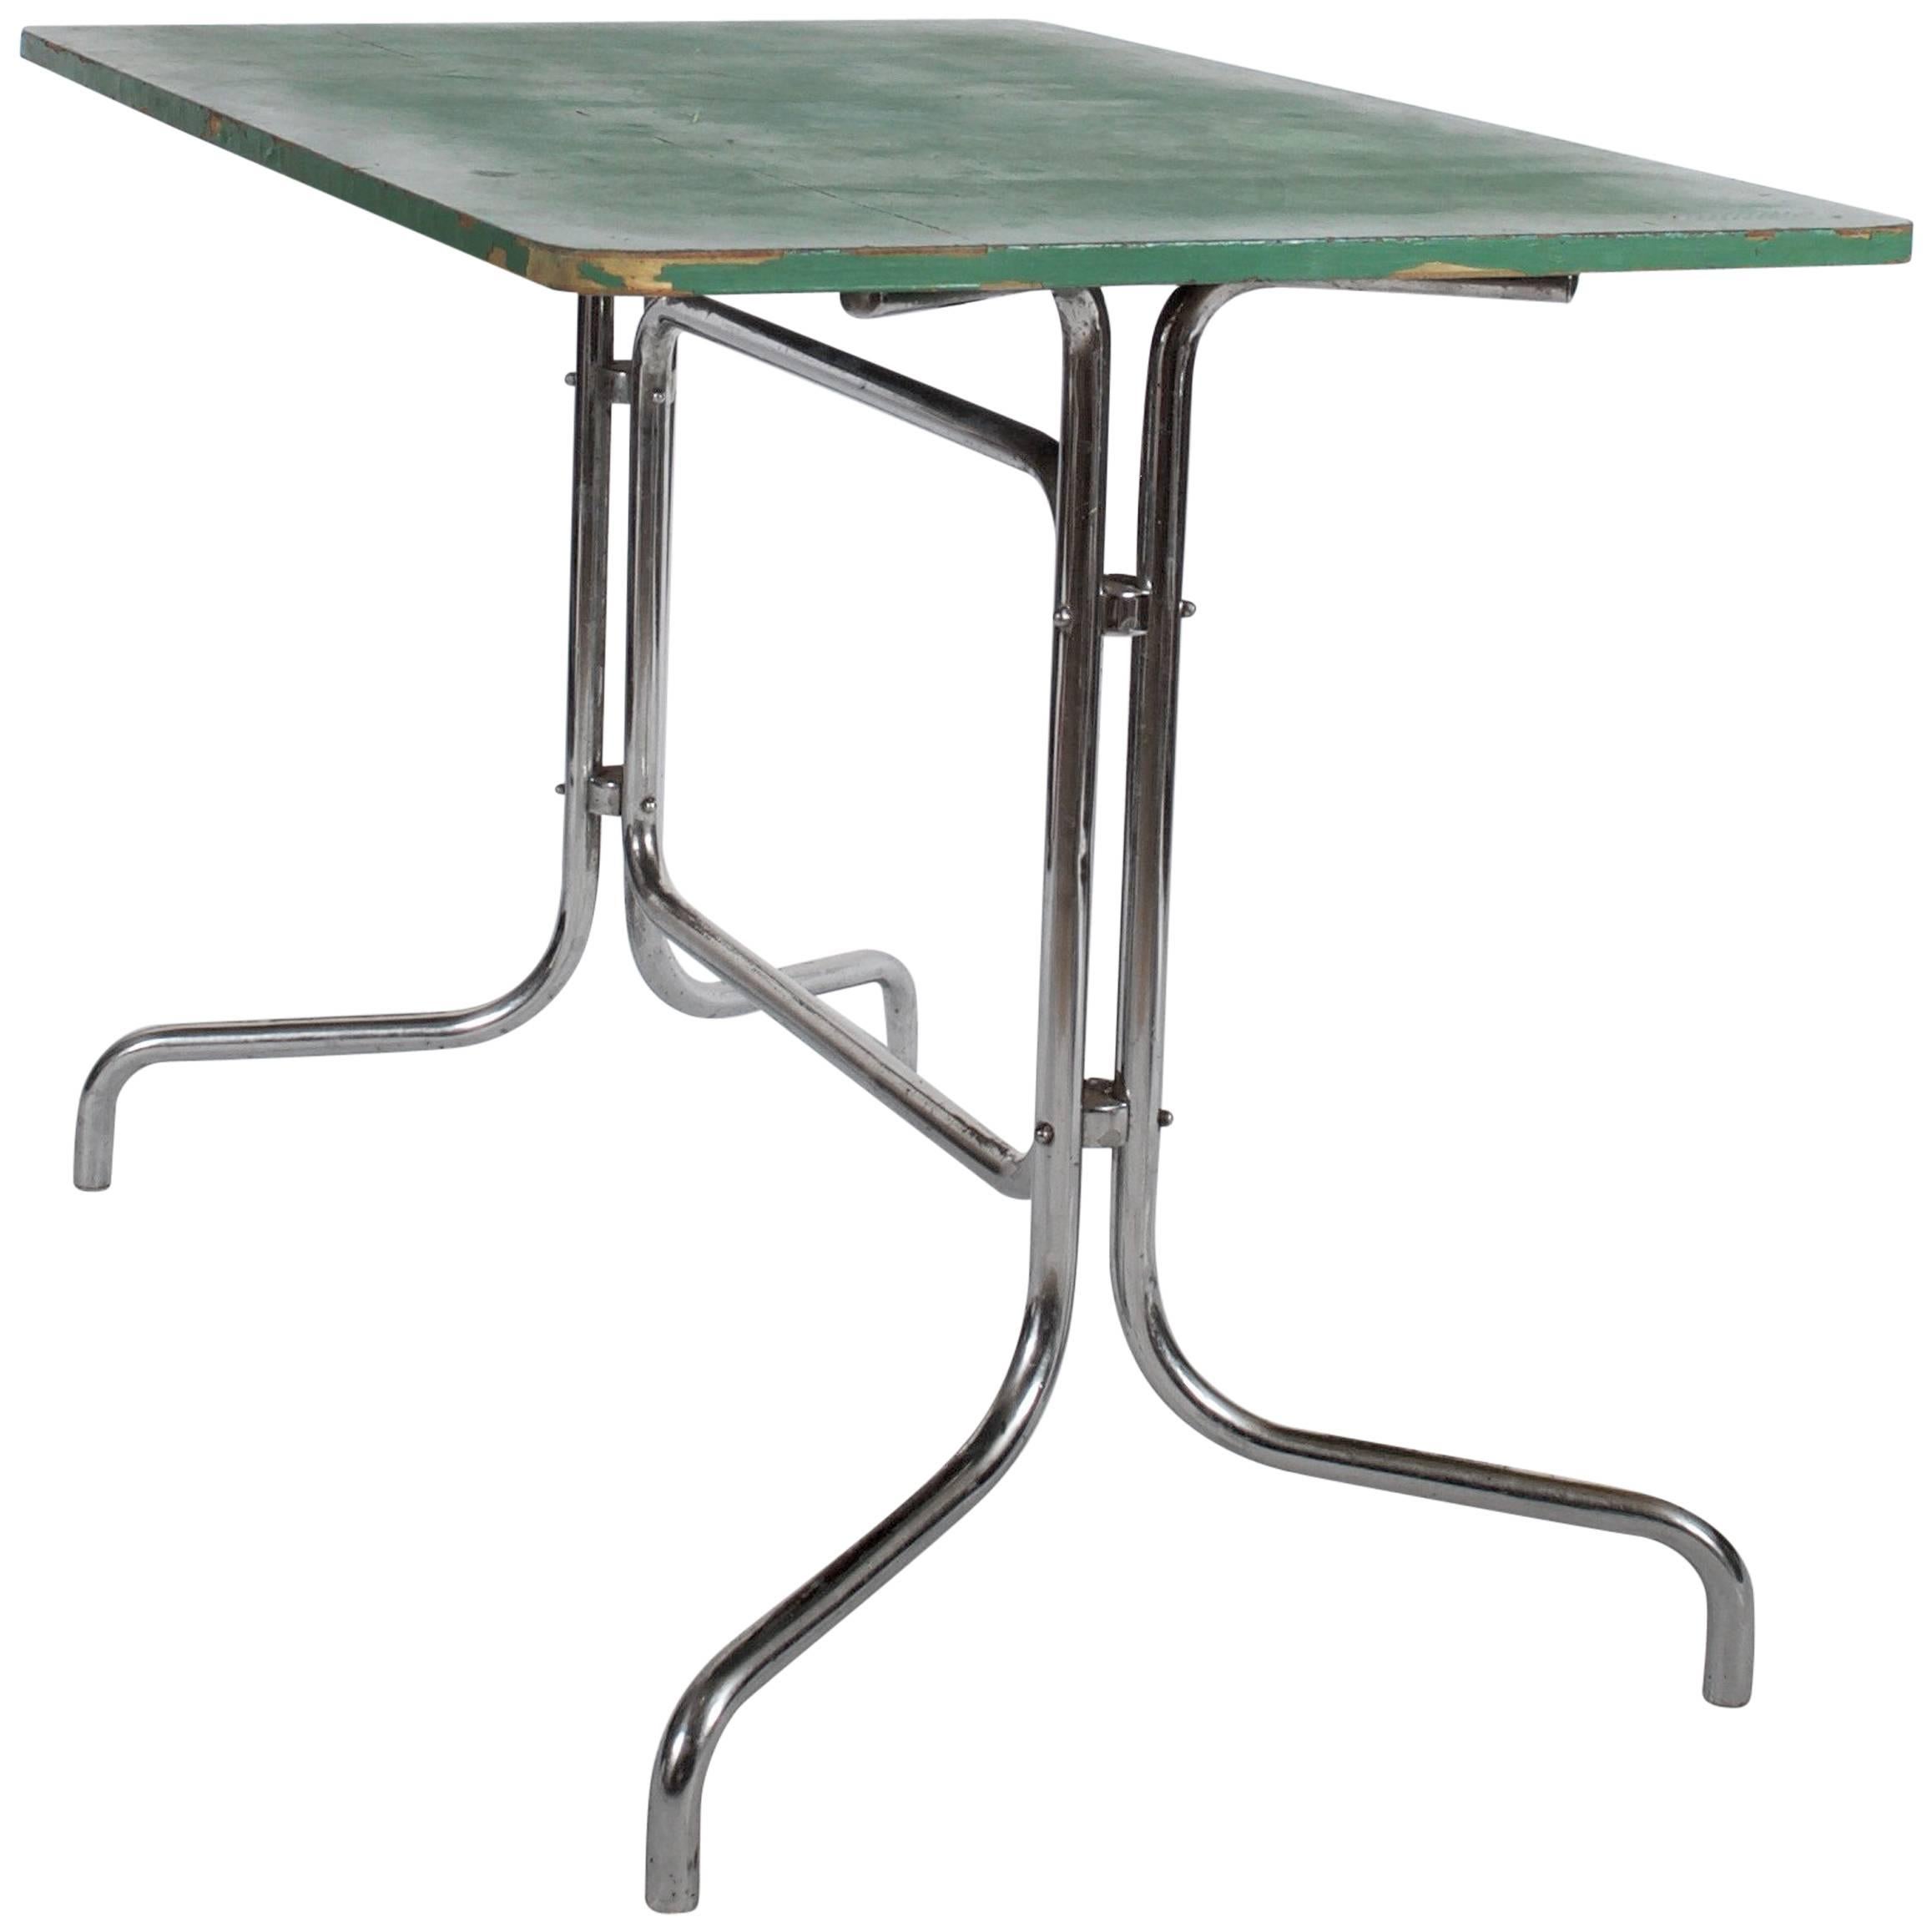 Extremely Rare Bauhaus Table by Marcel Breuer for Mücke & Melder